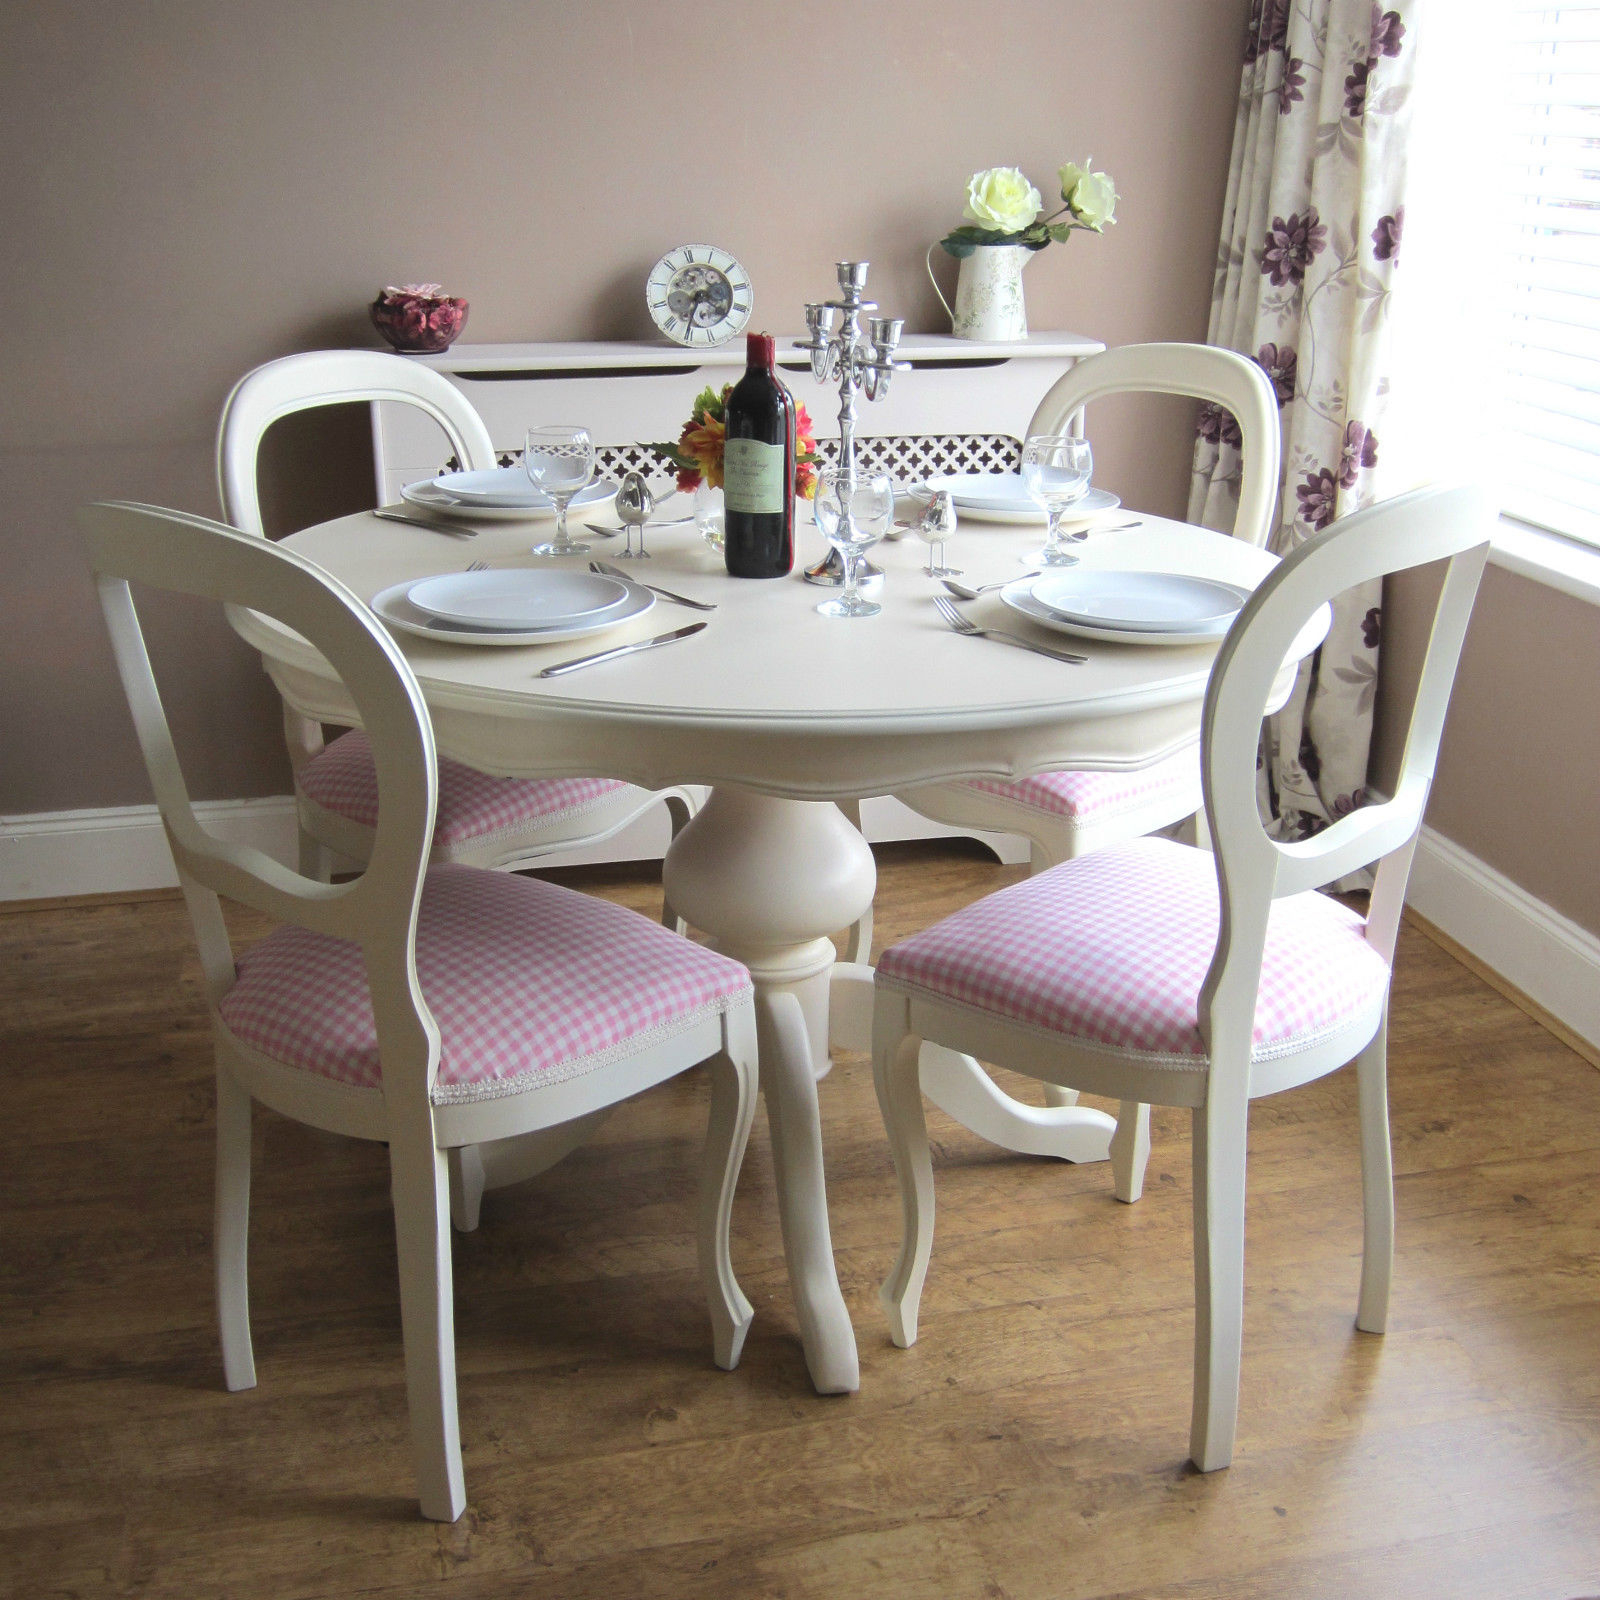 Shabby Chic Dining Table Visualhunt, Shabby Chic Round Kitchen Table And Chairs